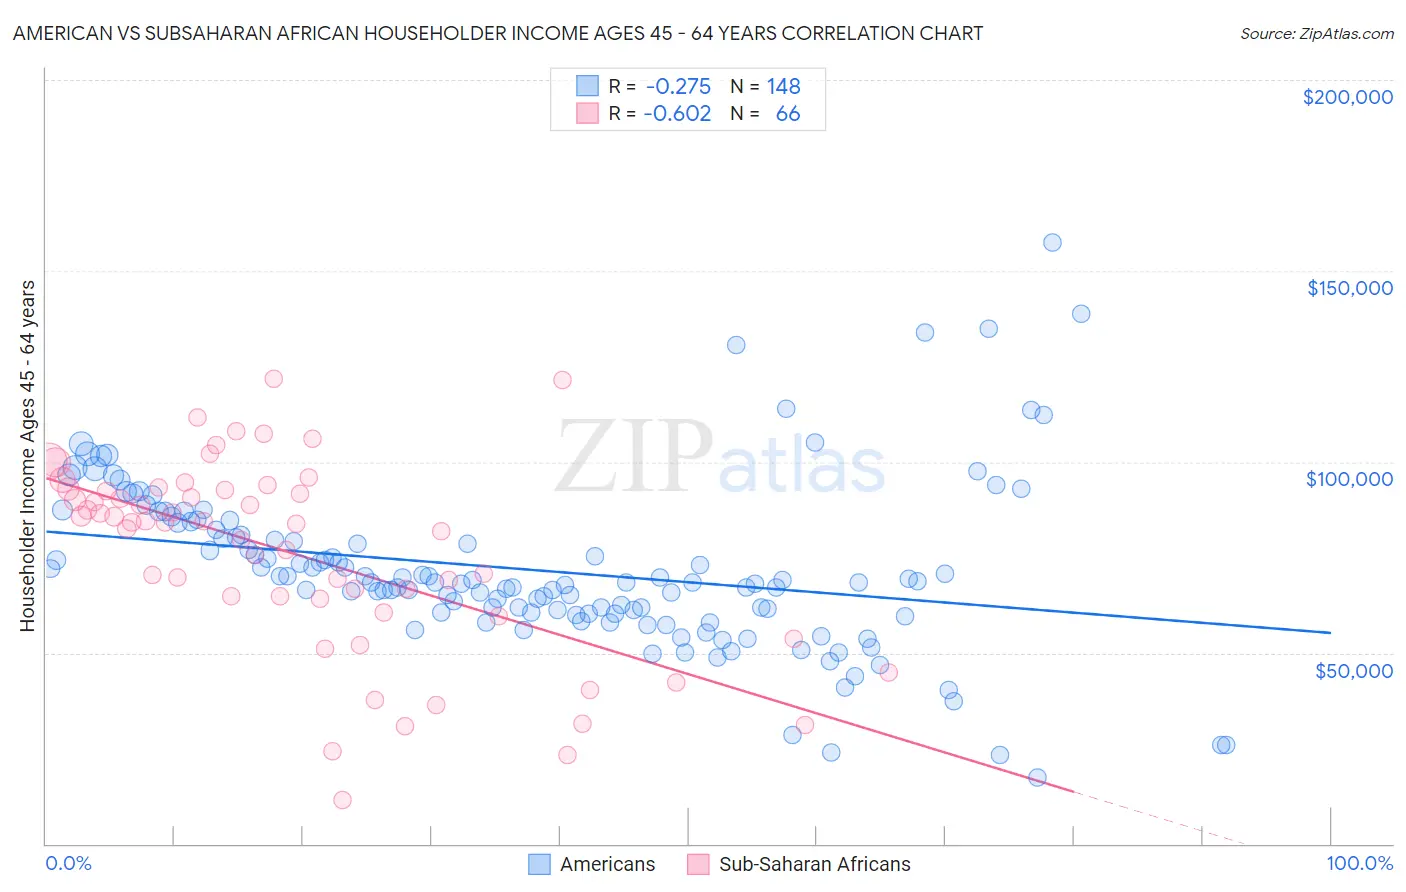 American vs Subsaharan African Householder Income Ages 45 - 64 years